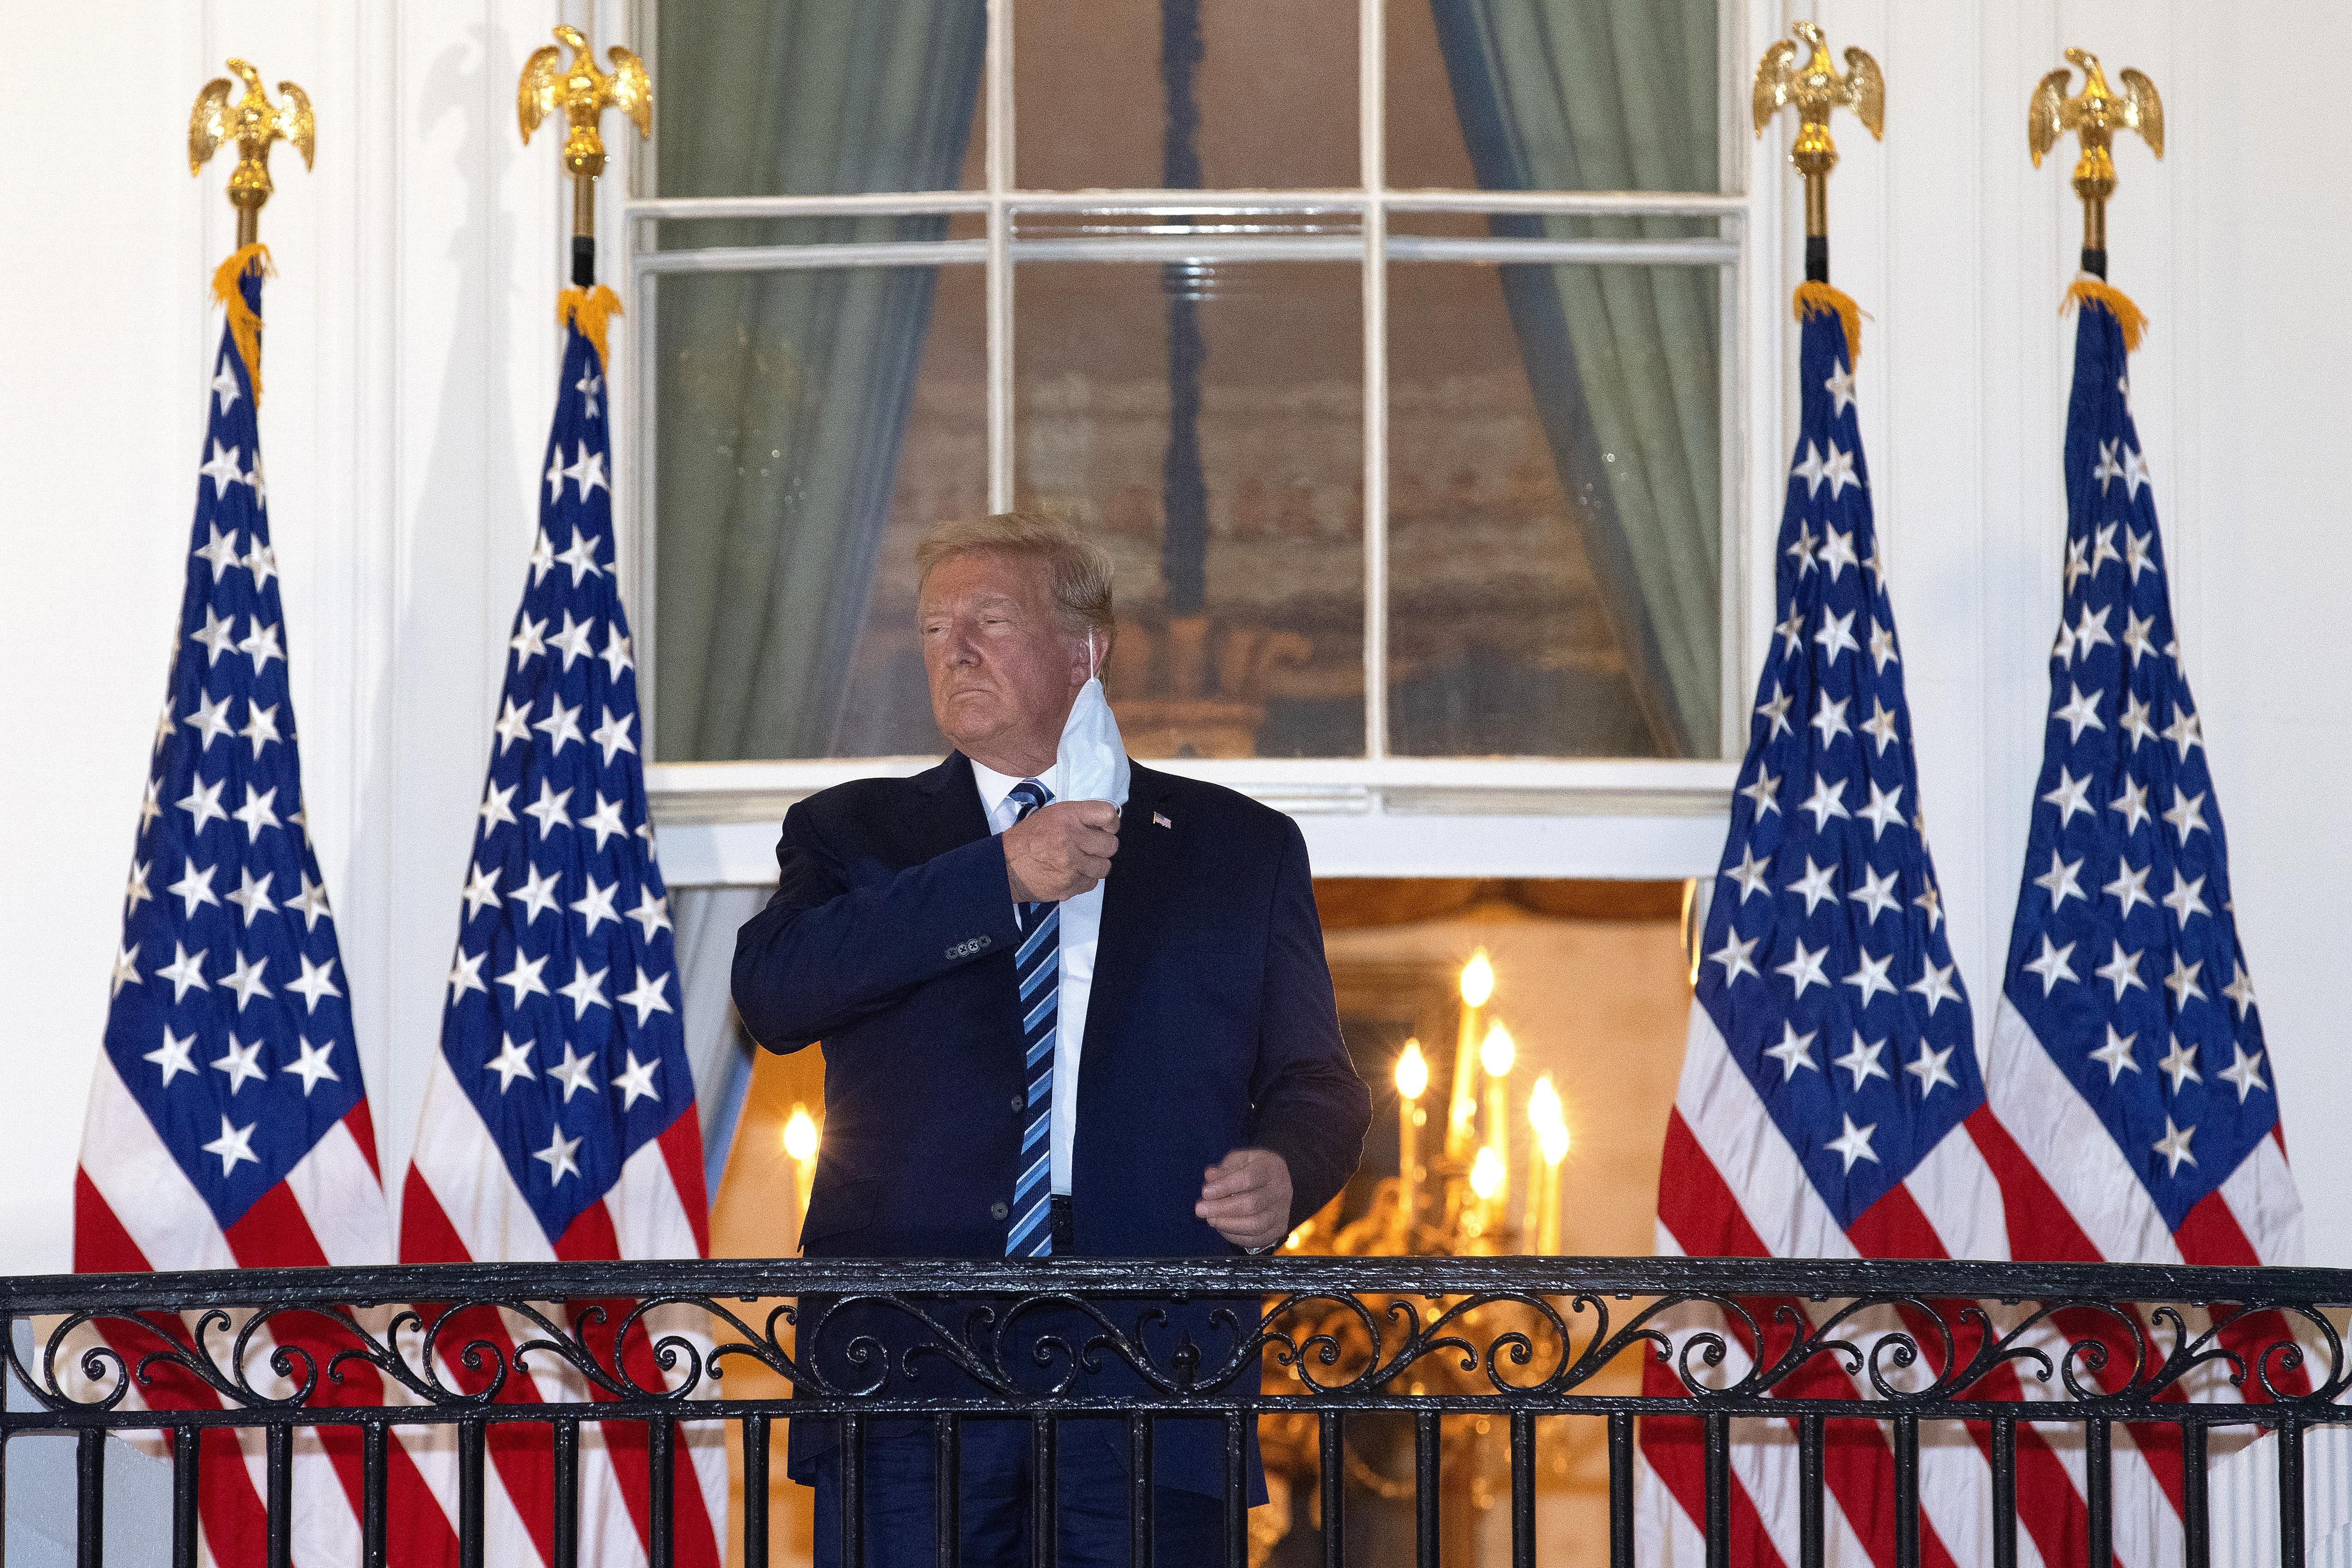 Trump removes his mask while standing on a balcony with American flags on either side of him